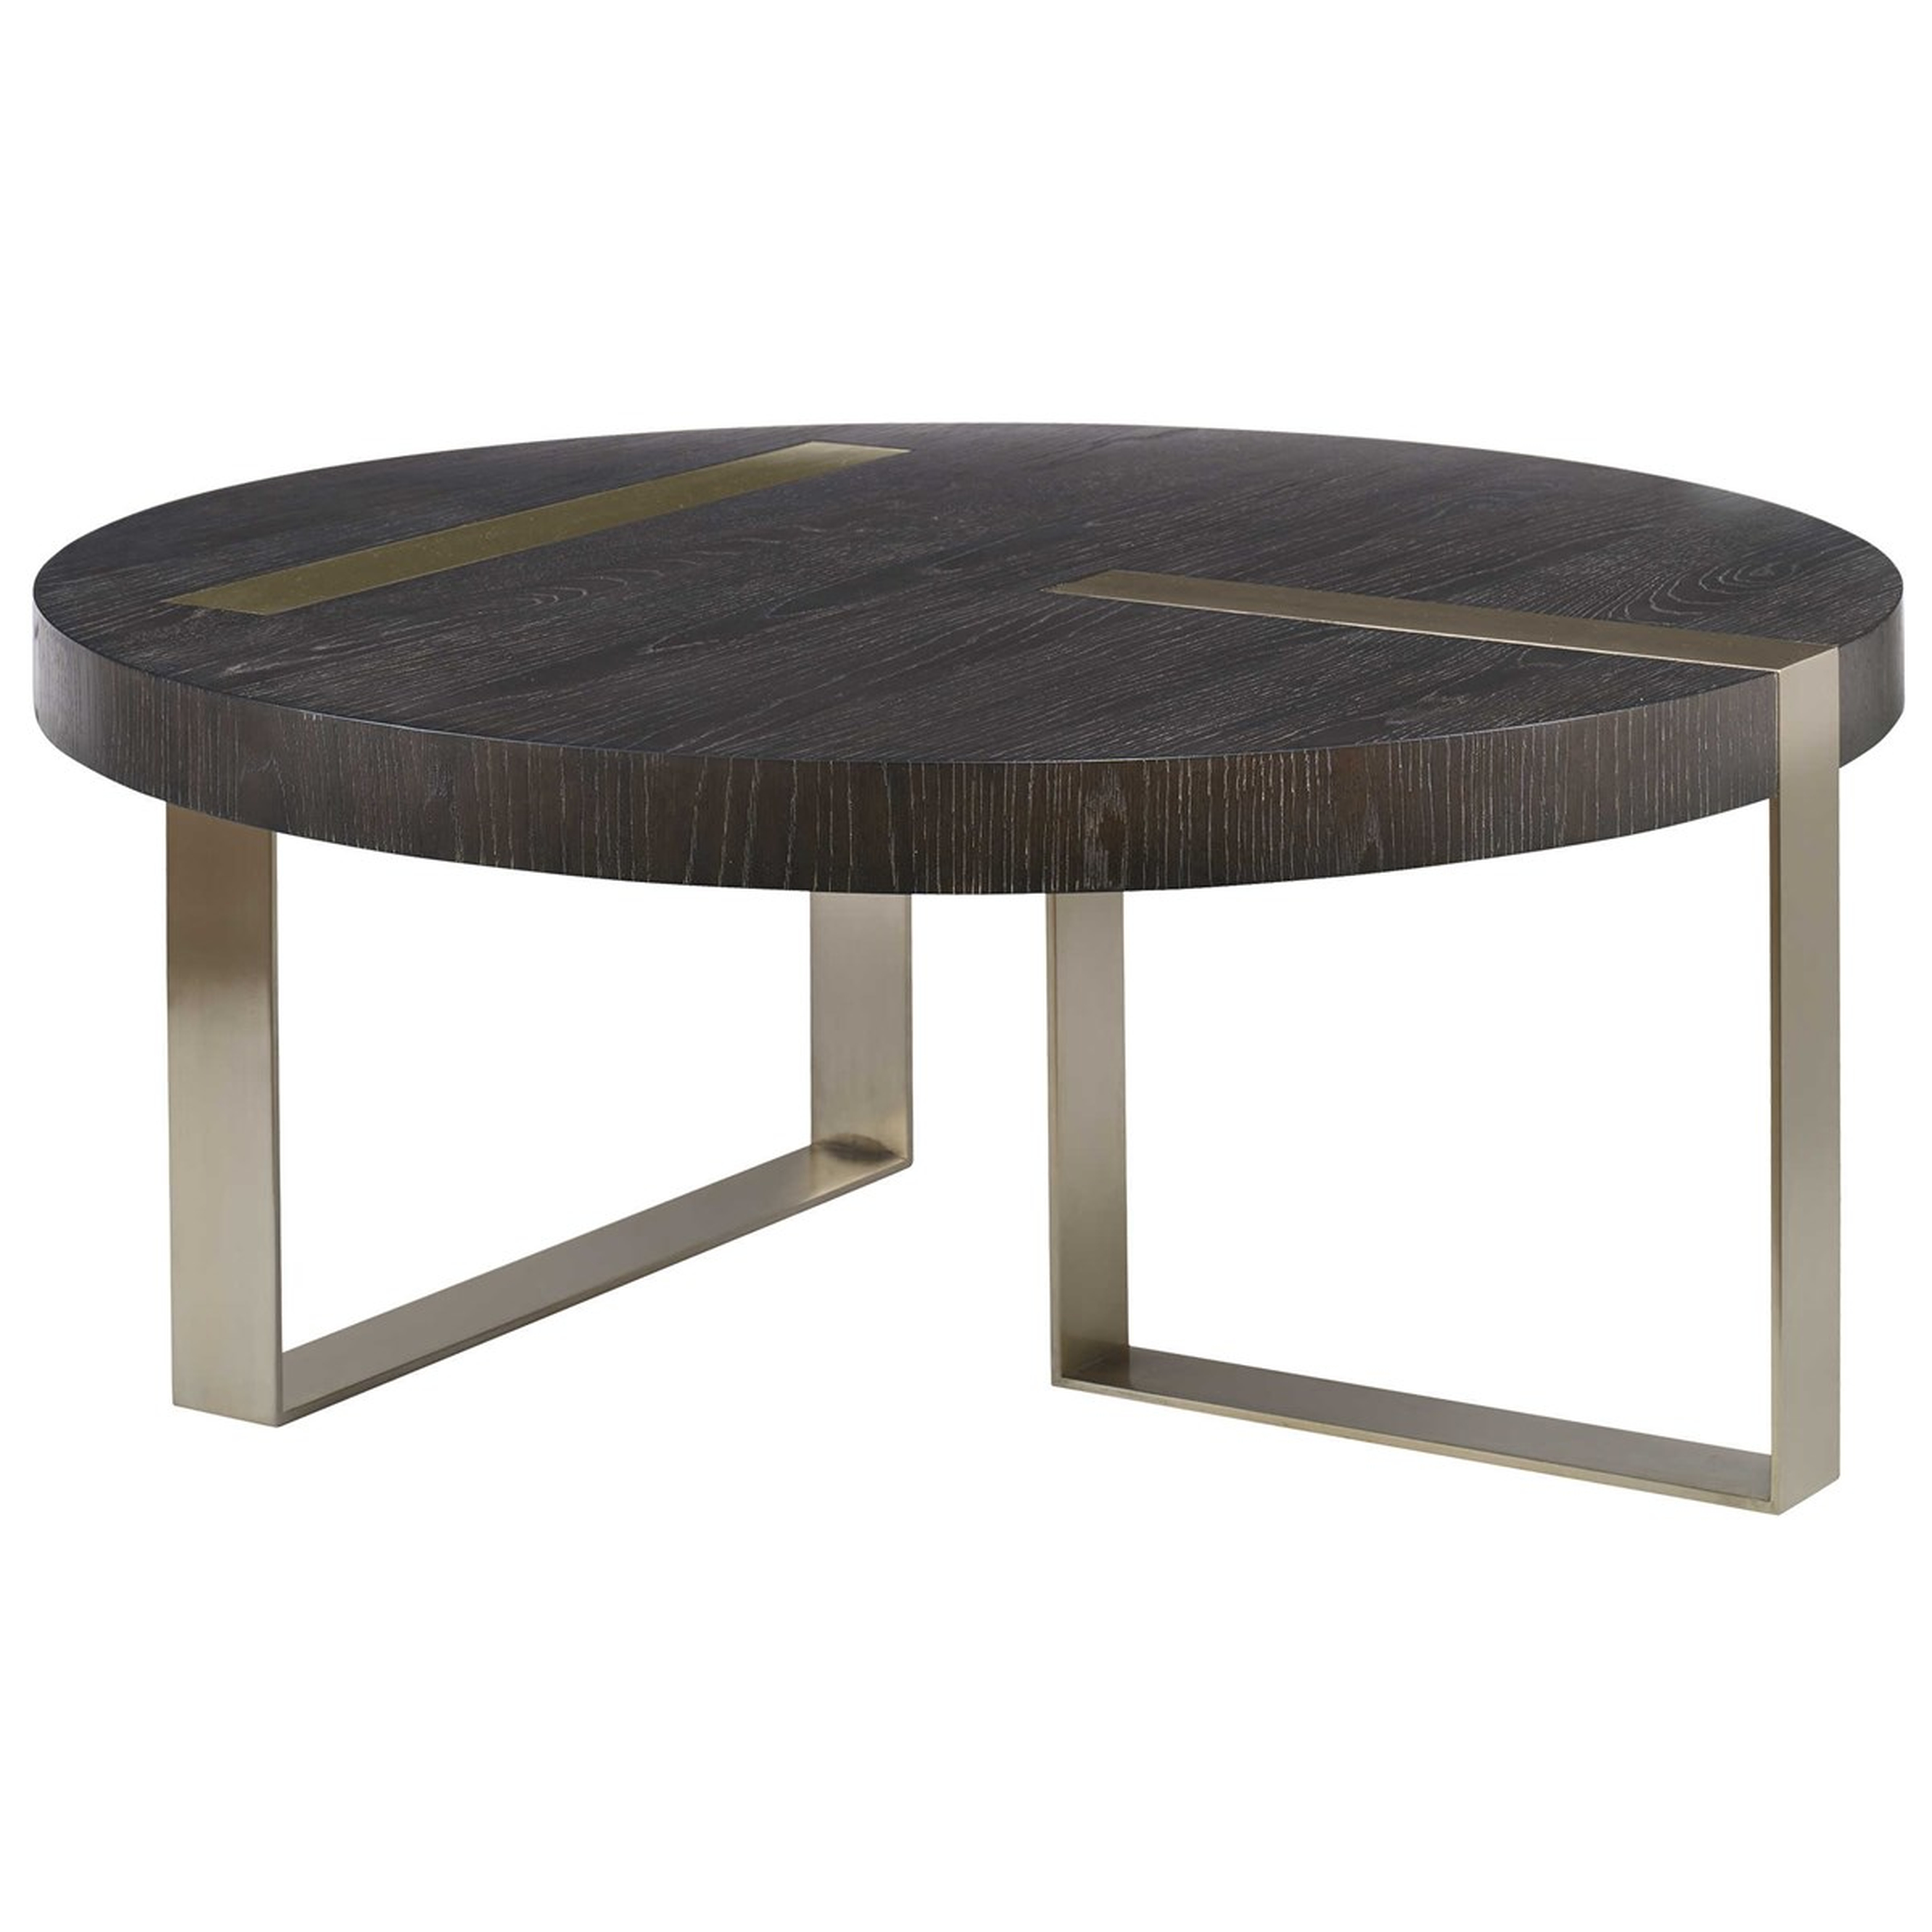 CONVERGE COFFEE TABLE - Hudsonhill Foundry